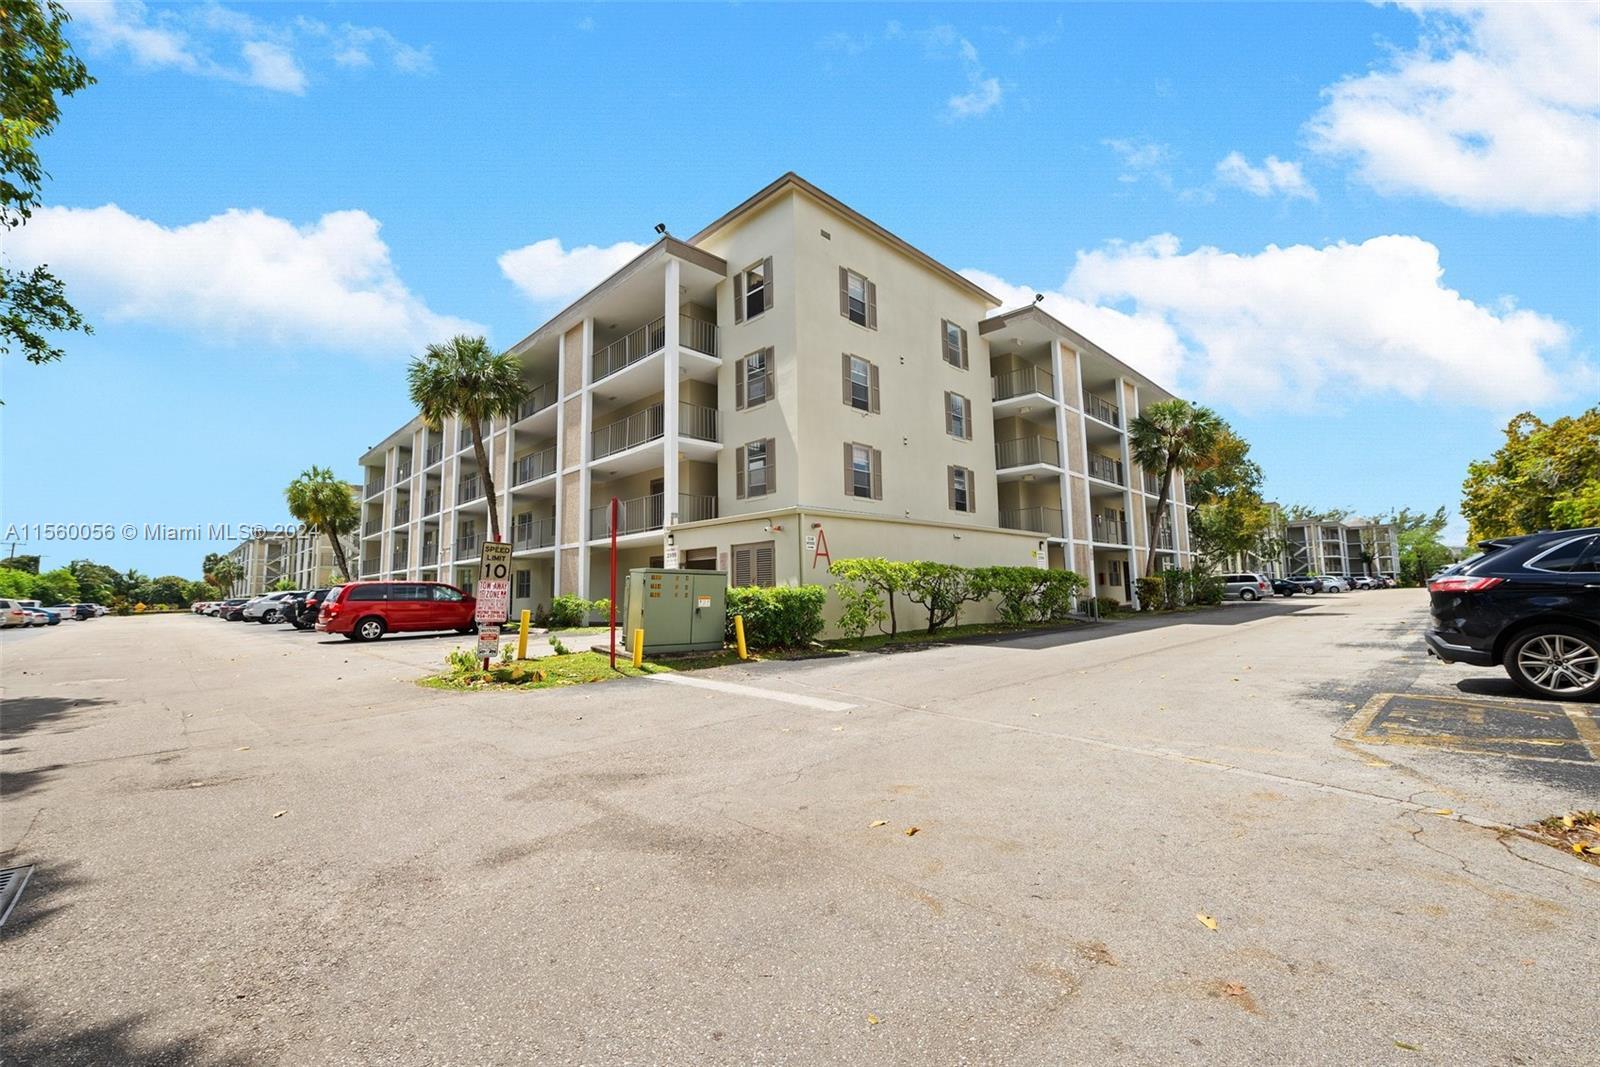 Photo of 2999 NW 48th Ave #245 in Lauderdale Lakes, FL